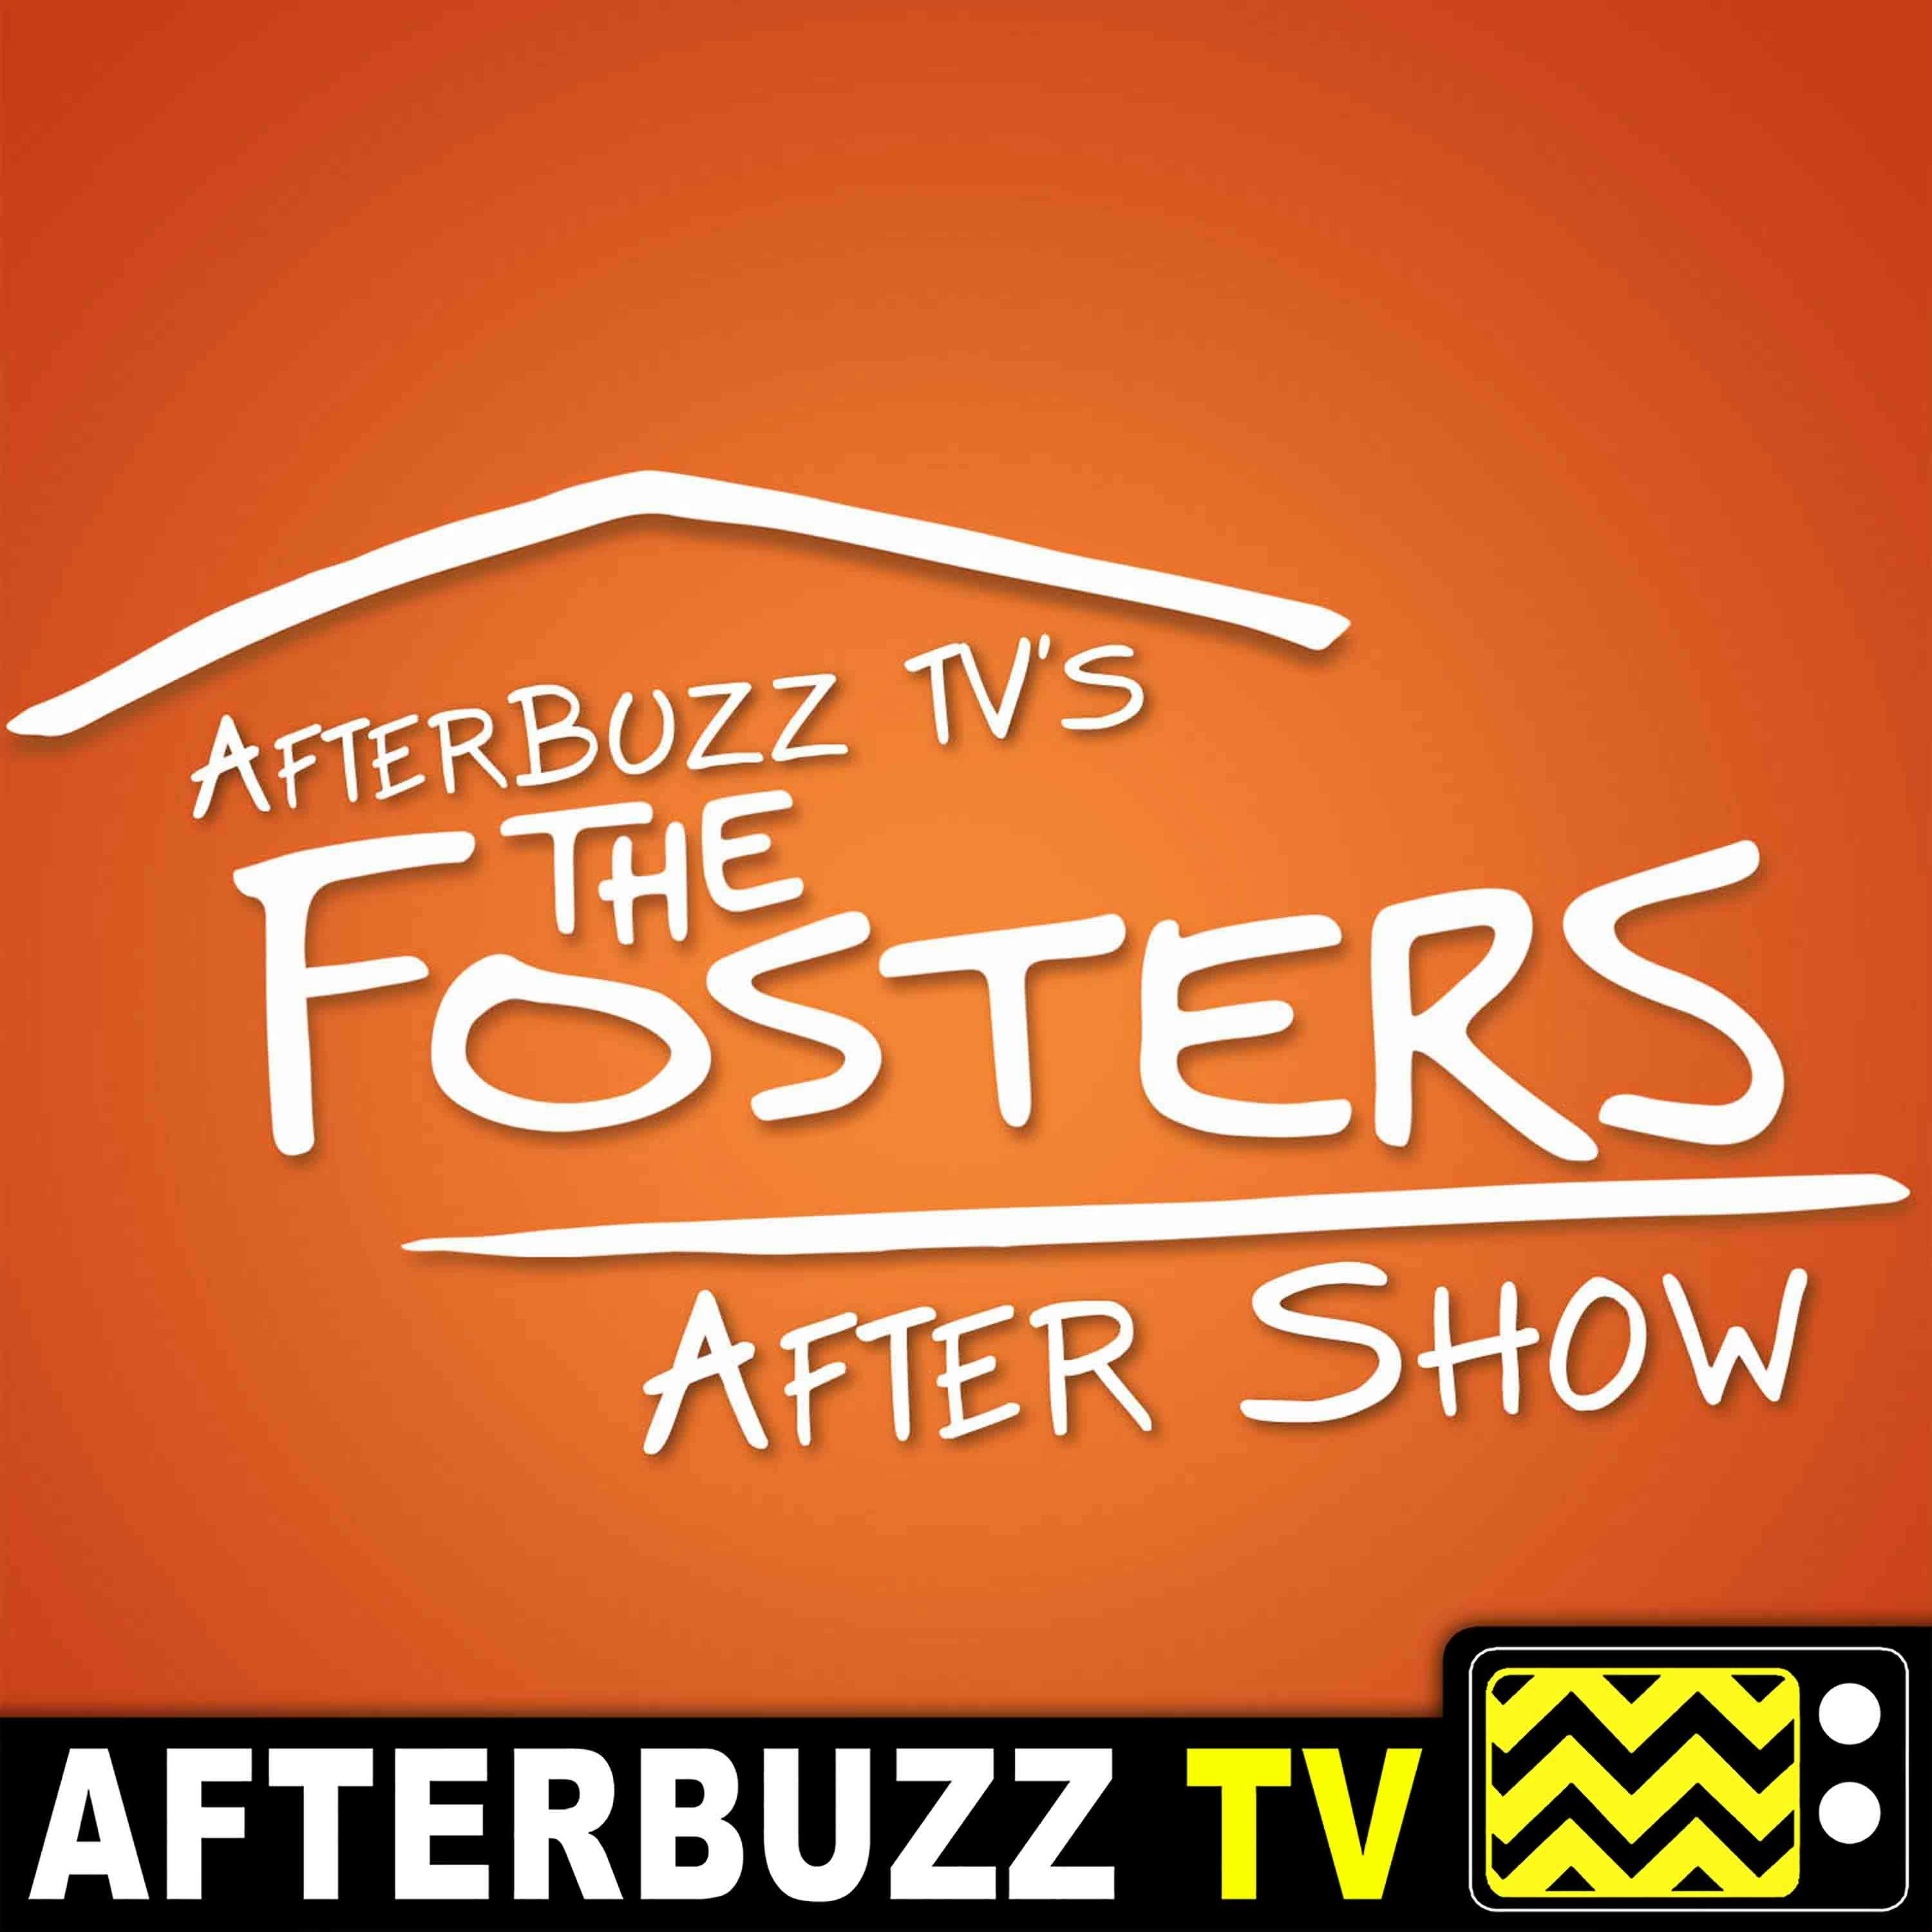 The Fosters S:5 | Meg DeLacy Guests on Welcome To The Jungler E:6 | AfterBuzz TV AfterShow